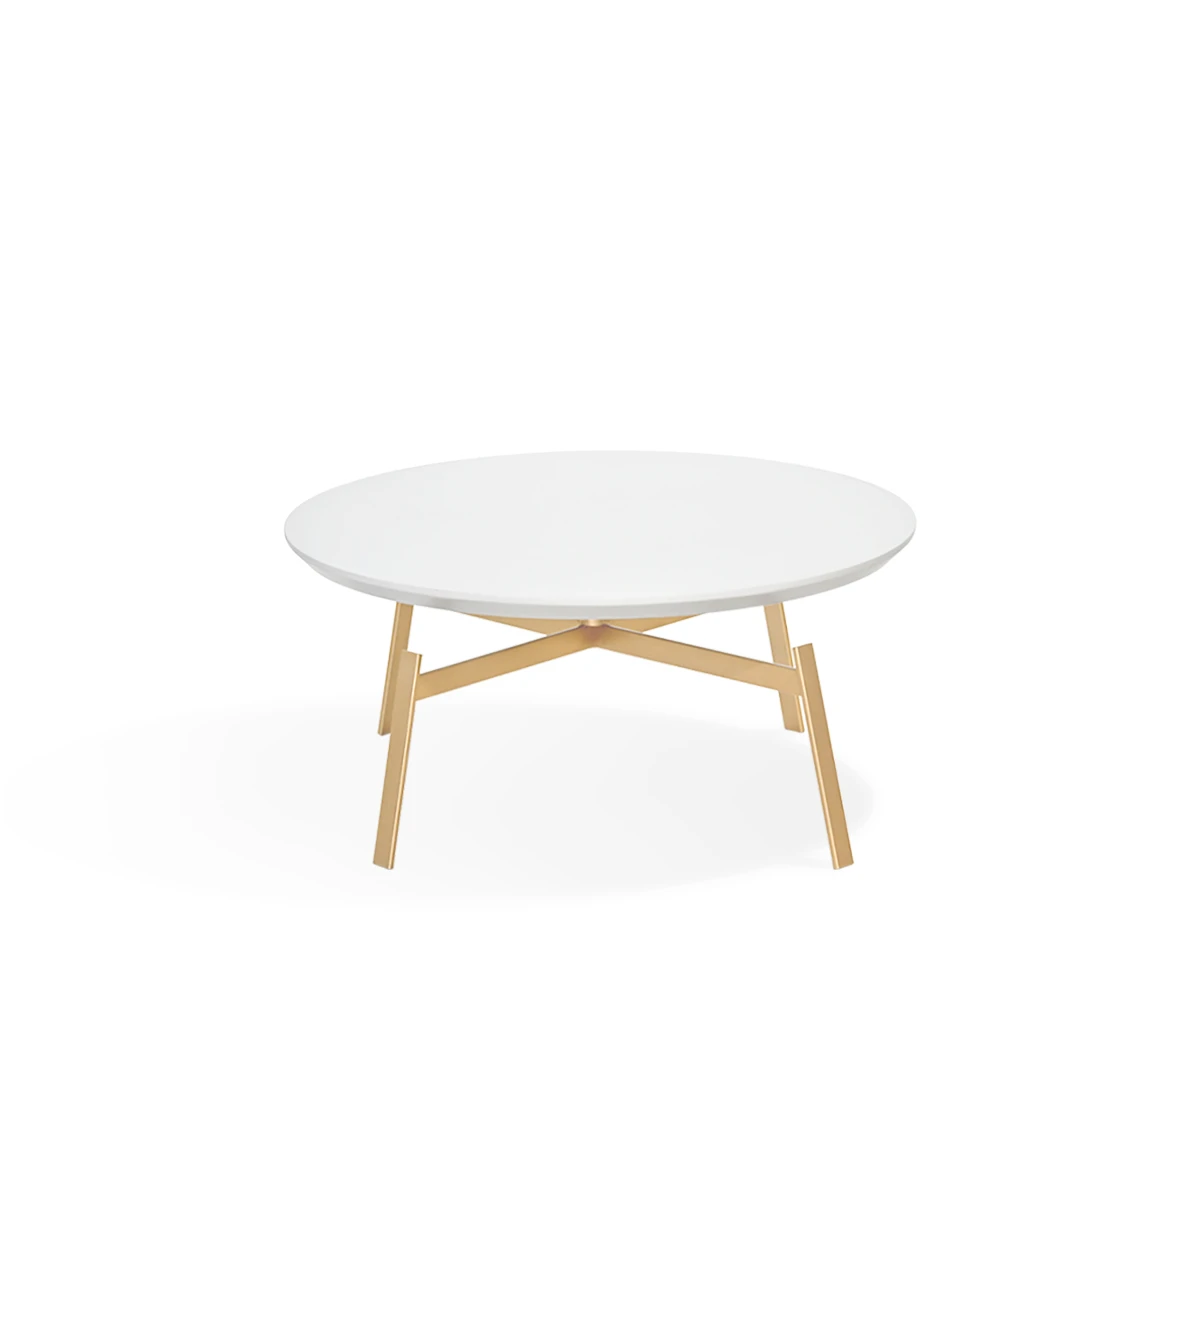 Tokyo round center table, pearl lacquered top and gold lacquered metal feet, Ø 100 cm.